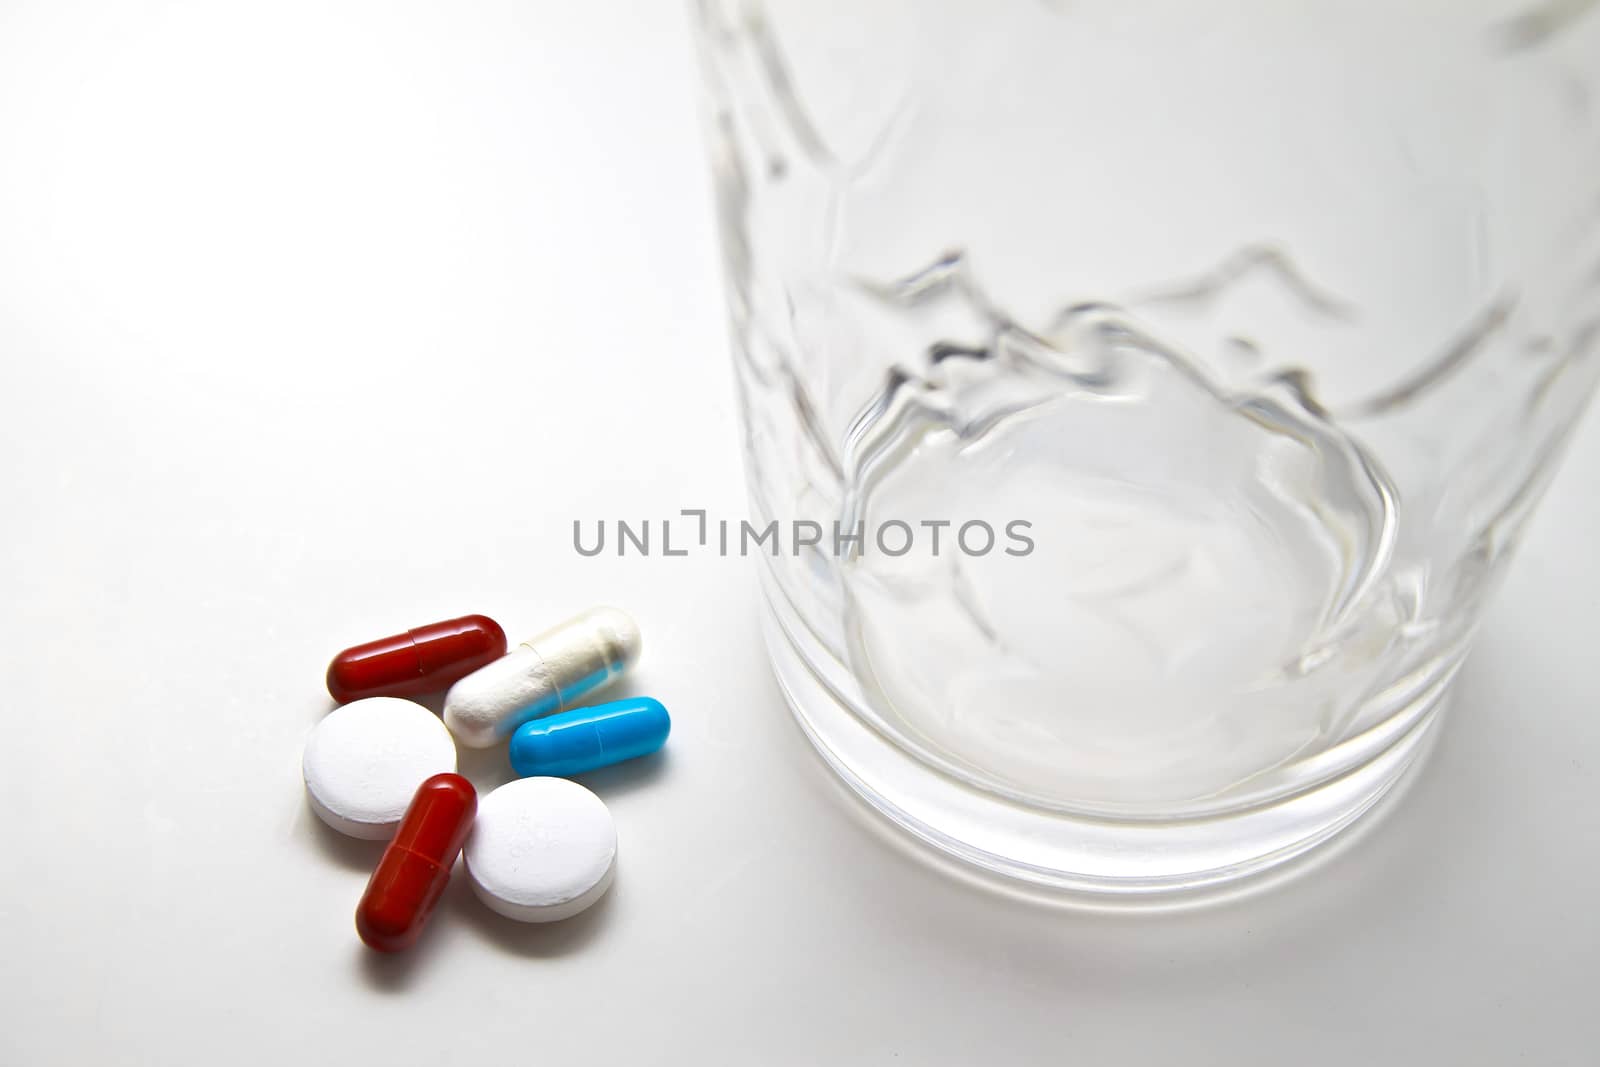 Pile of red, blue, and white pills of varying sizes with water glass. All on white background.